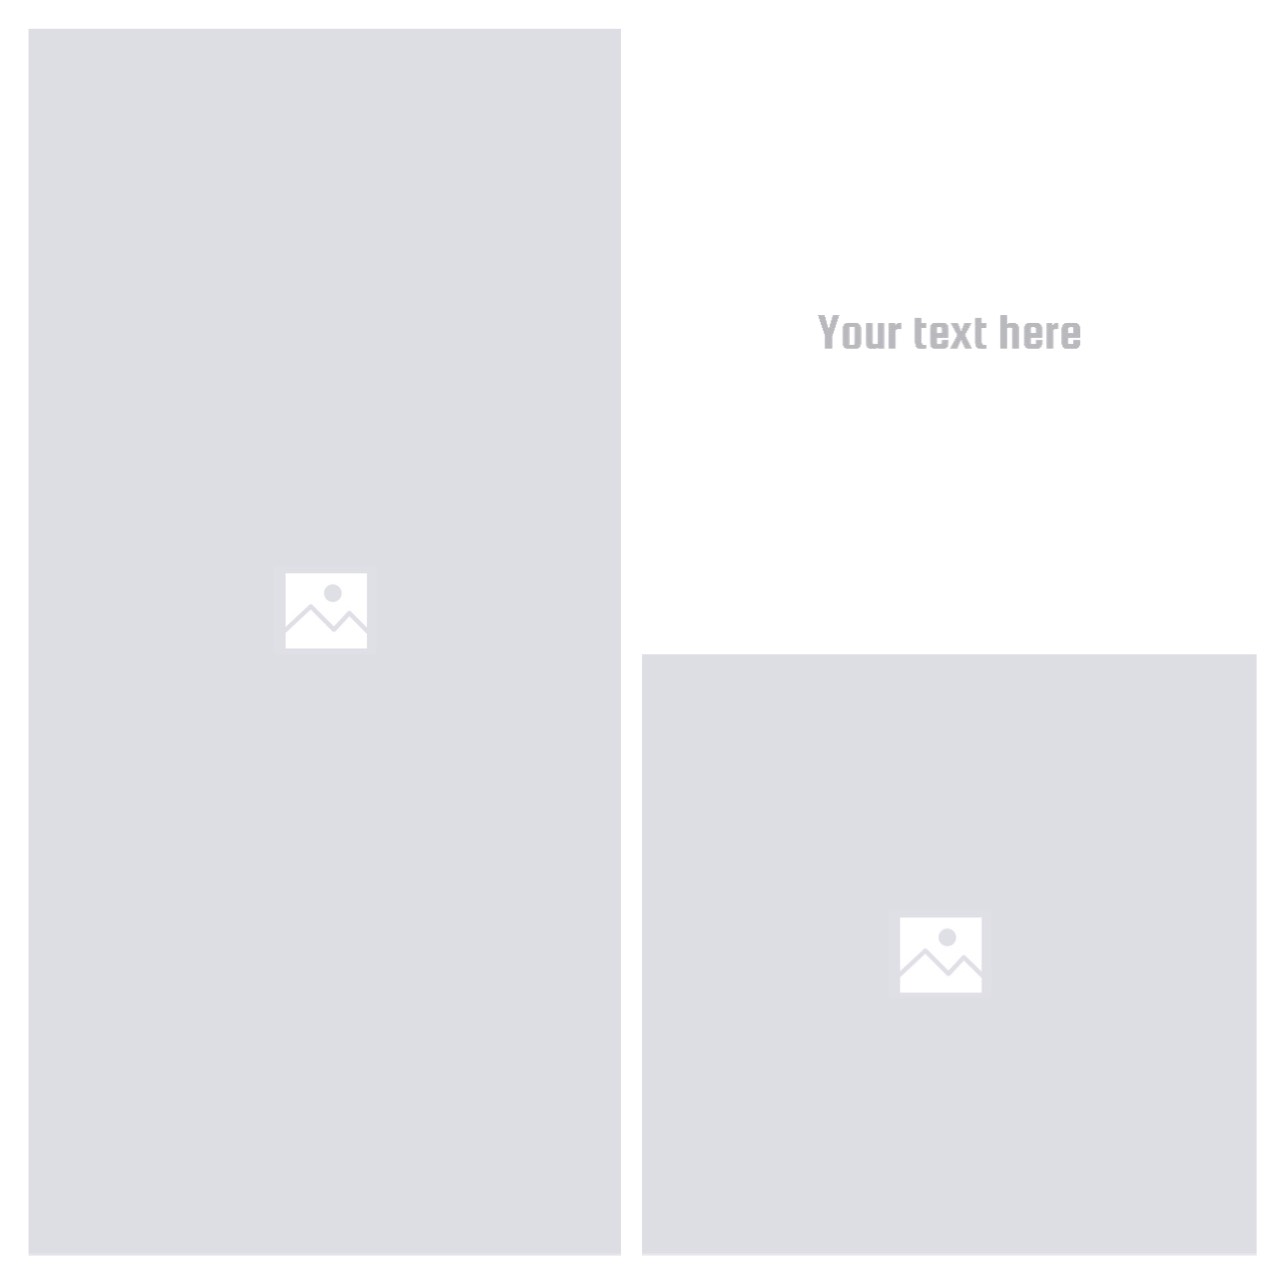 An Image Of A White Envelope With A White Background Layouts Template